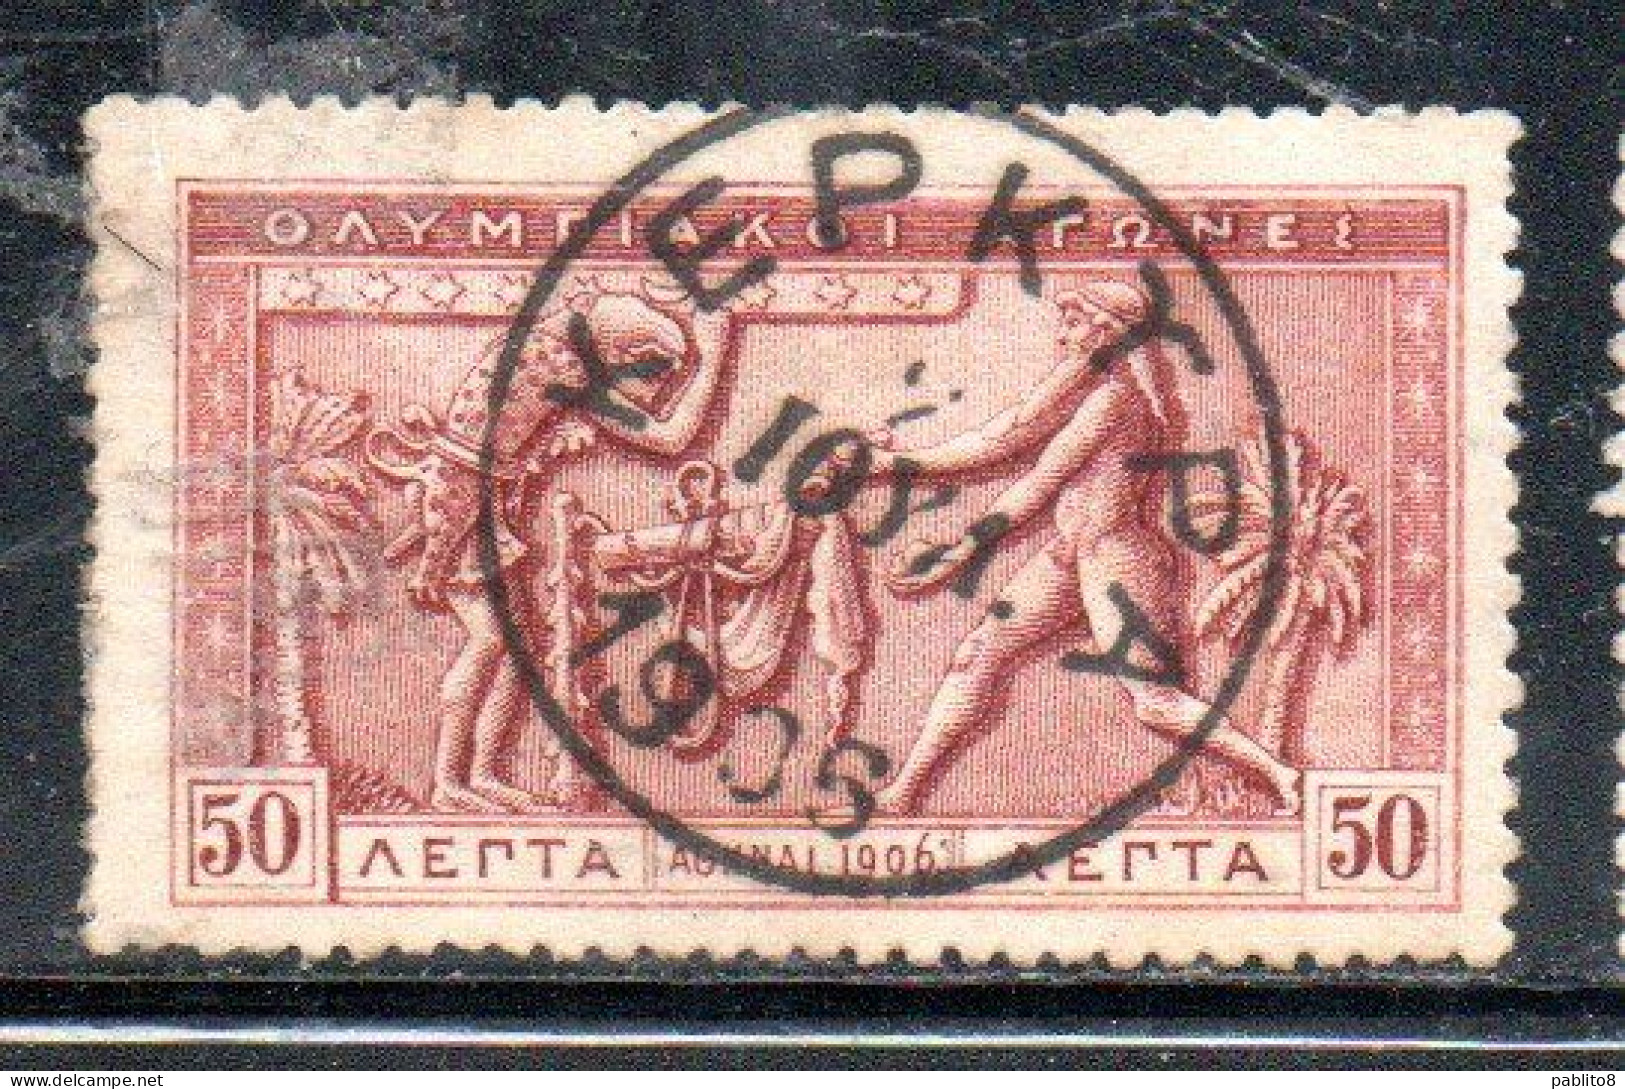 GREECE GRECIA ELLAS 1906 GREEK SPECIAL OLYMPIC GAMES ATHENS ATLAS AND HERCULES 50l USED USATO OBLITERE' - Usados